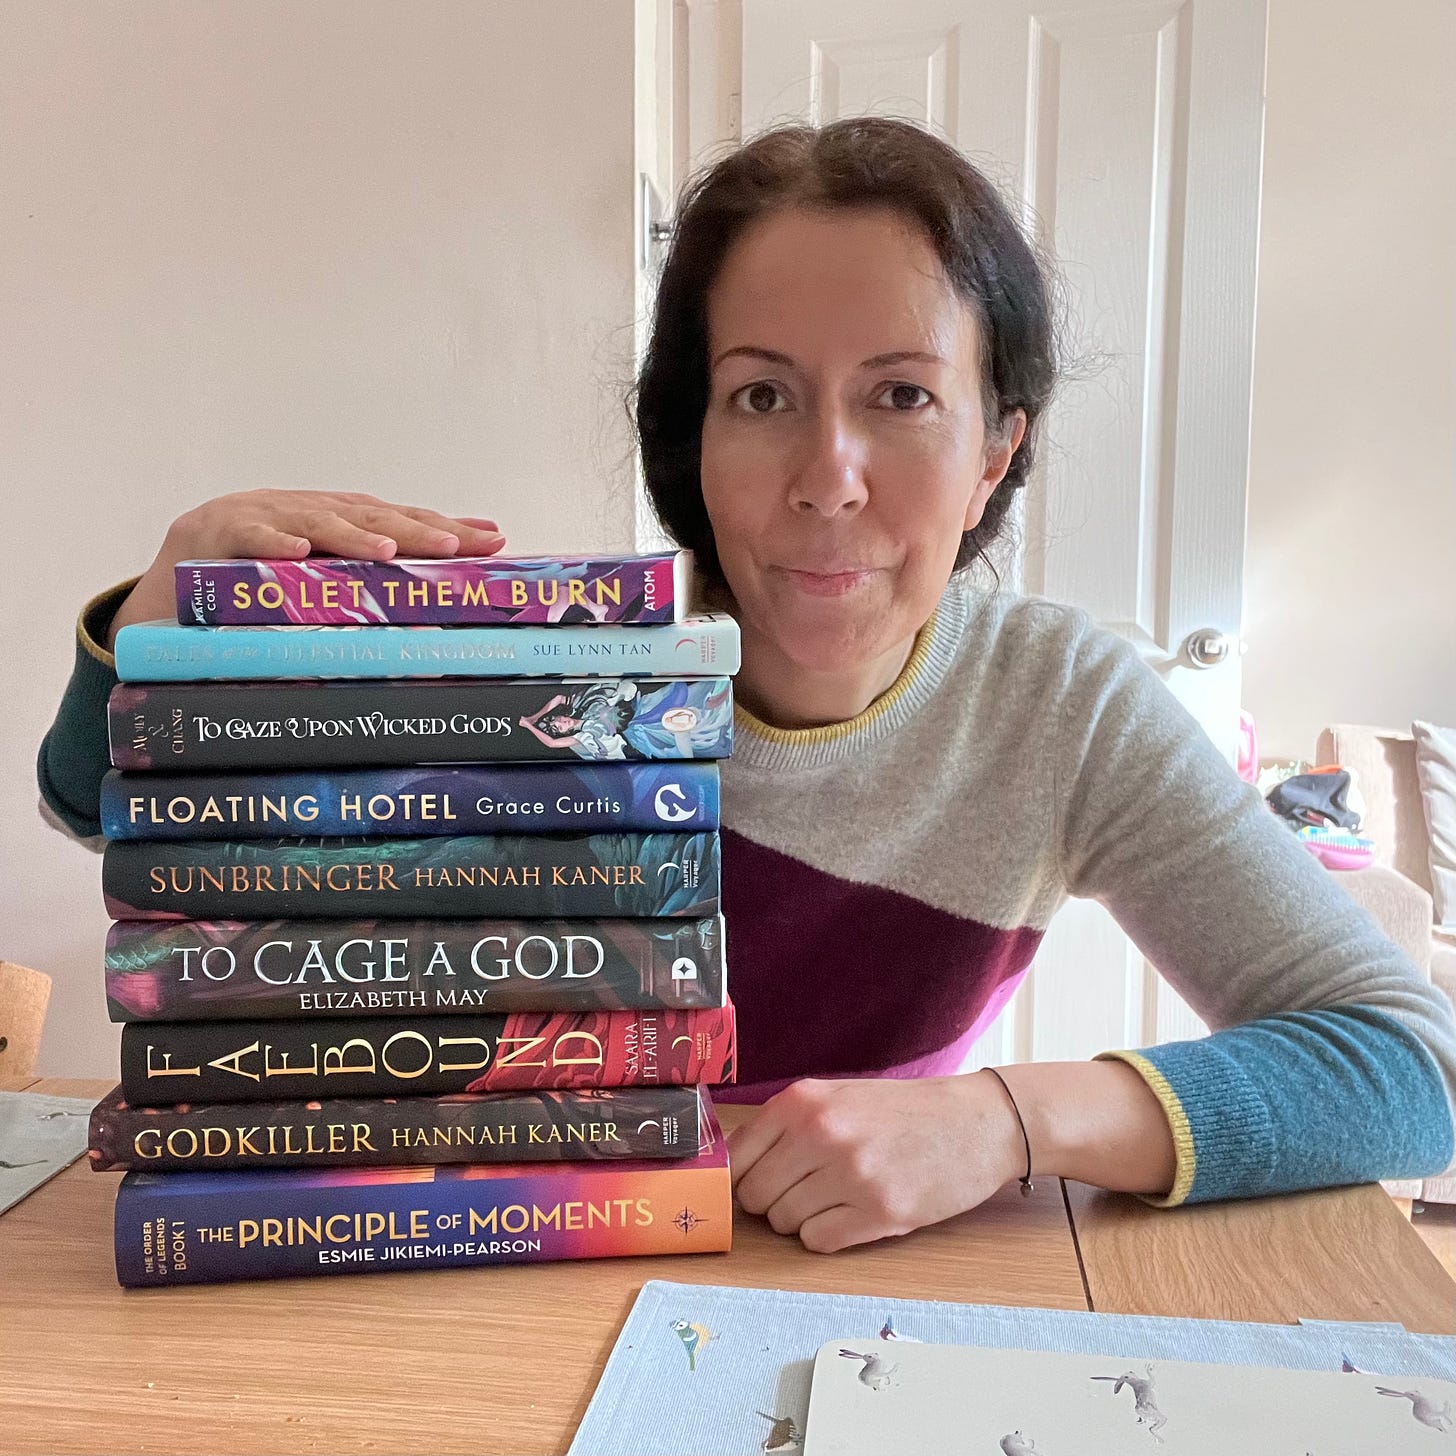 A photo of me next to a stack of books including The Principle of Moments, Godkiller, Faebound, To Cage a God, Sunbringer, Floating Hotel, To Gaze Upon Wicked Gods, Tales of the Celestial Kingdom and So Let The Burn.